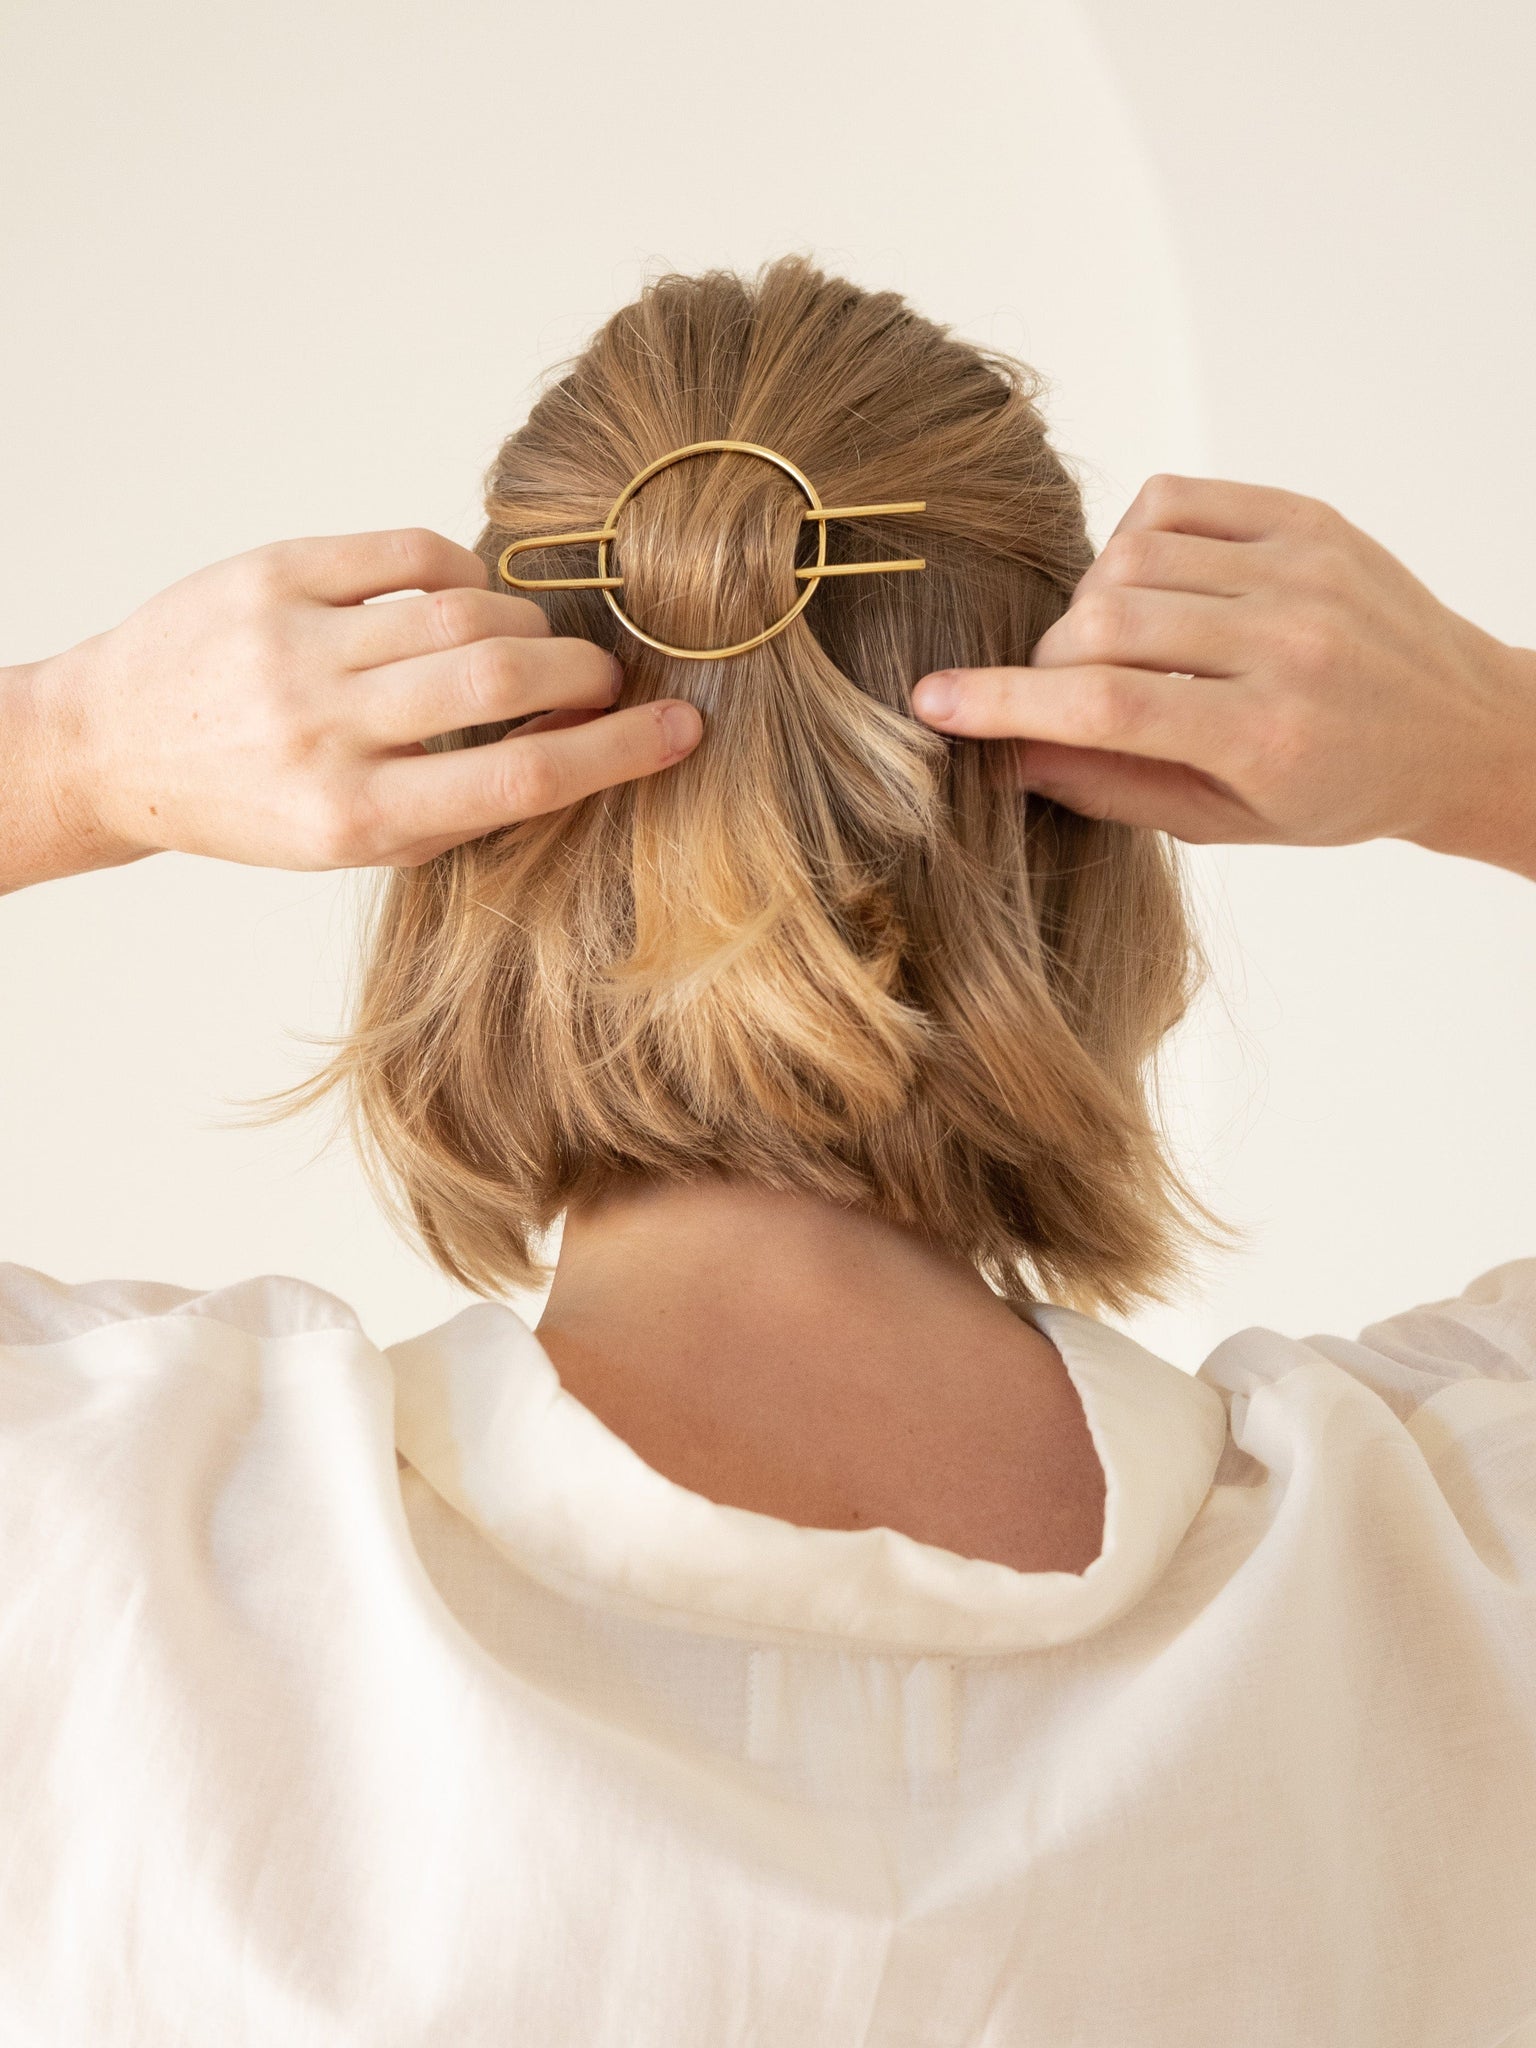 A woman is holding a Classic Hair Pin - pre-order in her hair.